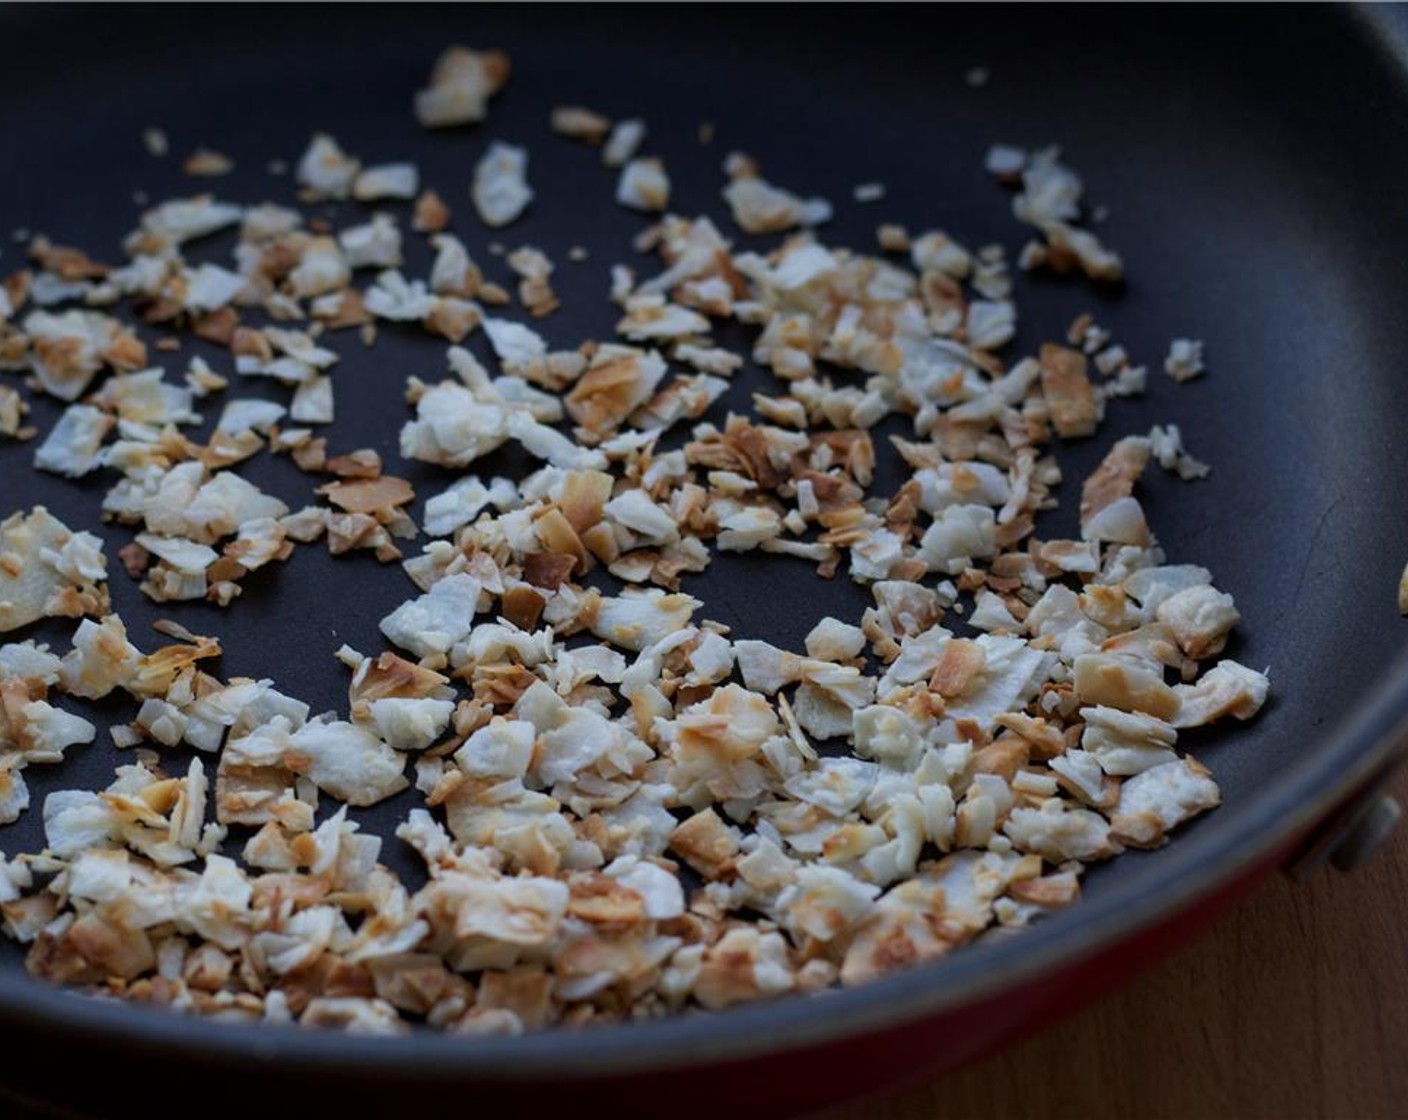 step 5 Heat a skillet over low heat. Toast the Unsweetened Coconut Flakes (1/4 cup) for a few minutes until golden brown, stirring frequently.